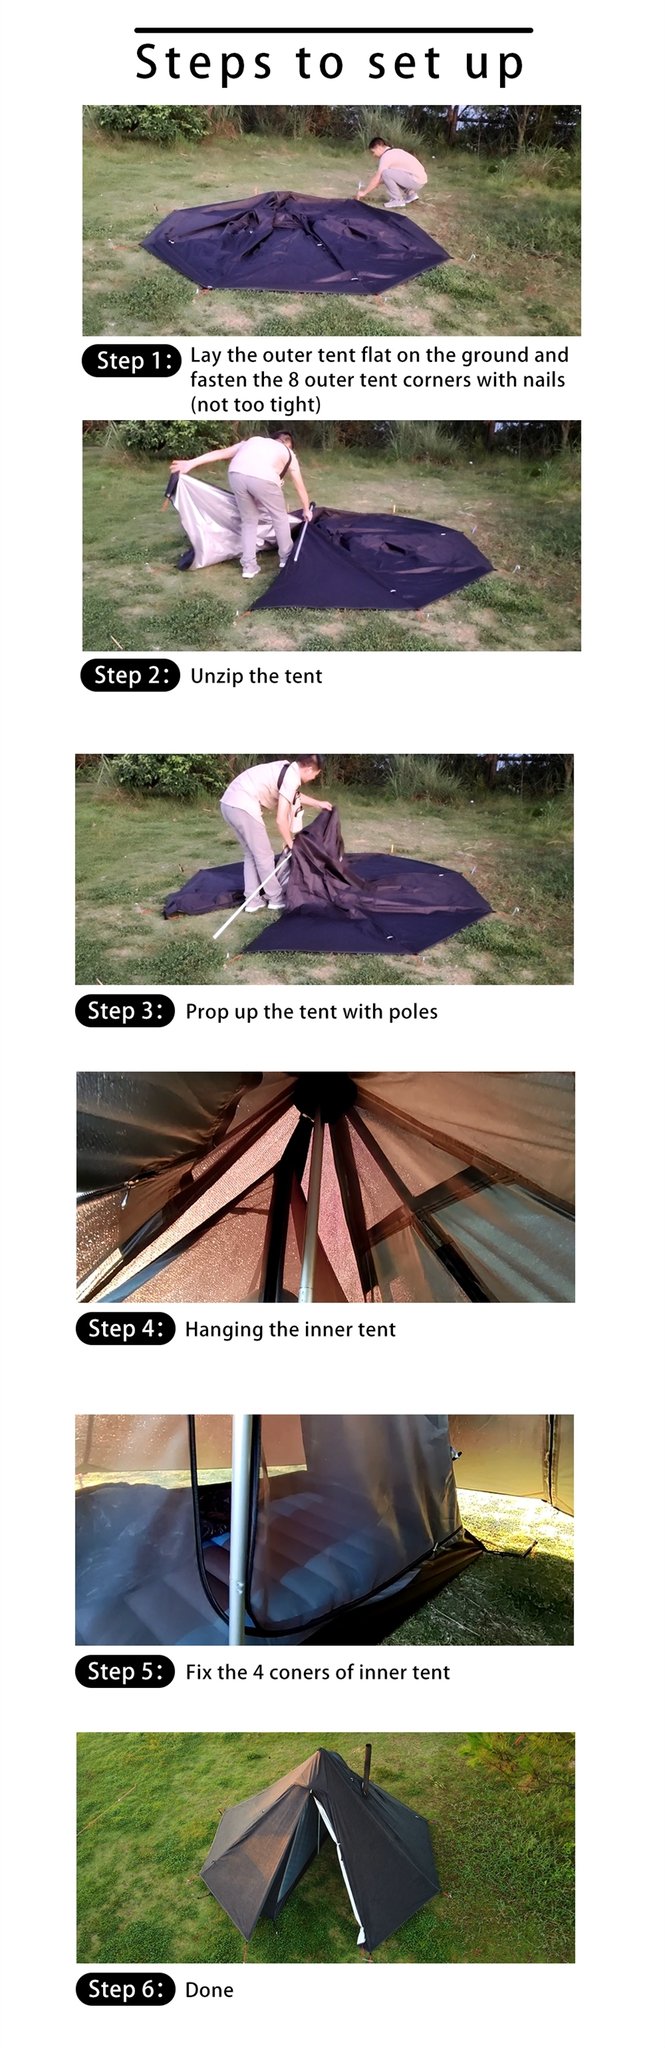 Instructions and Safety Advice for Setup Tents and Pyramid Tents